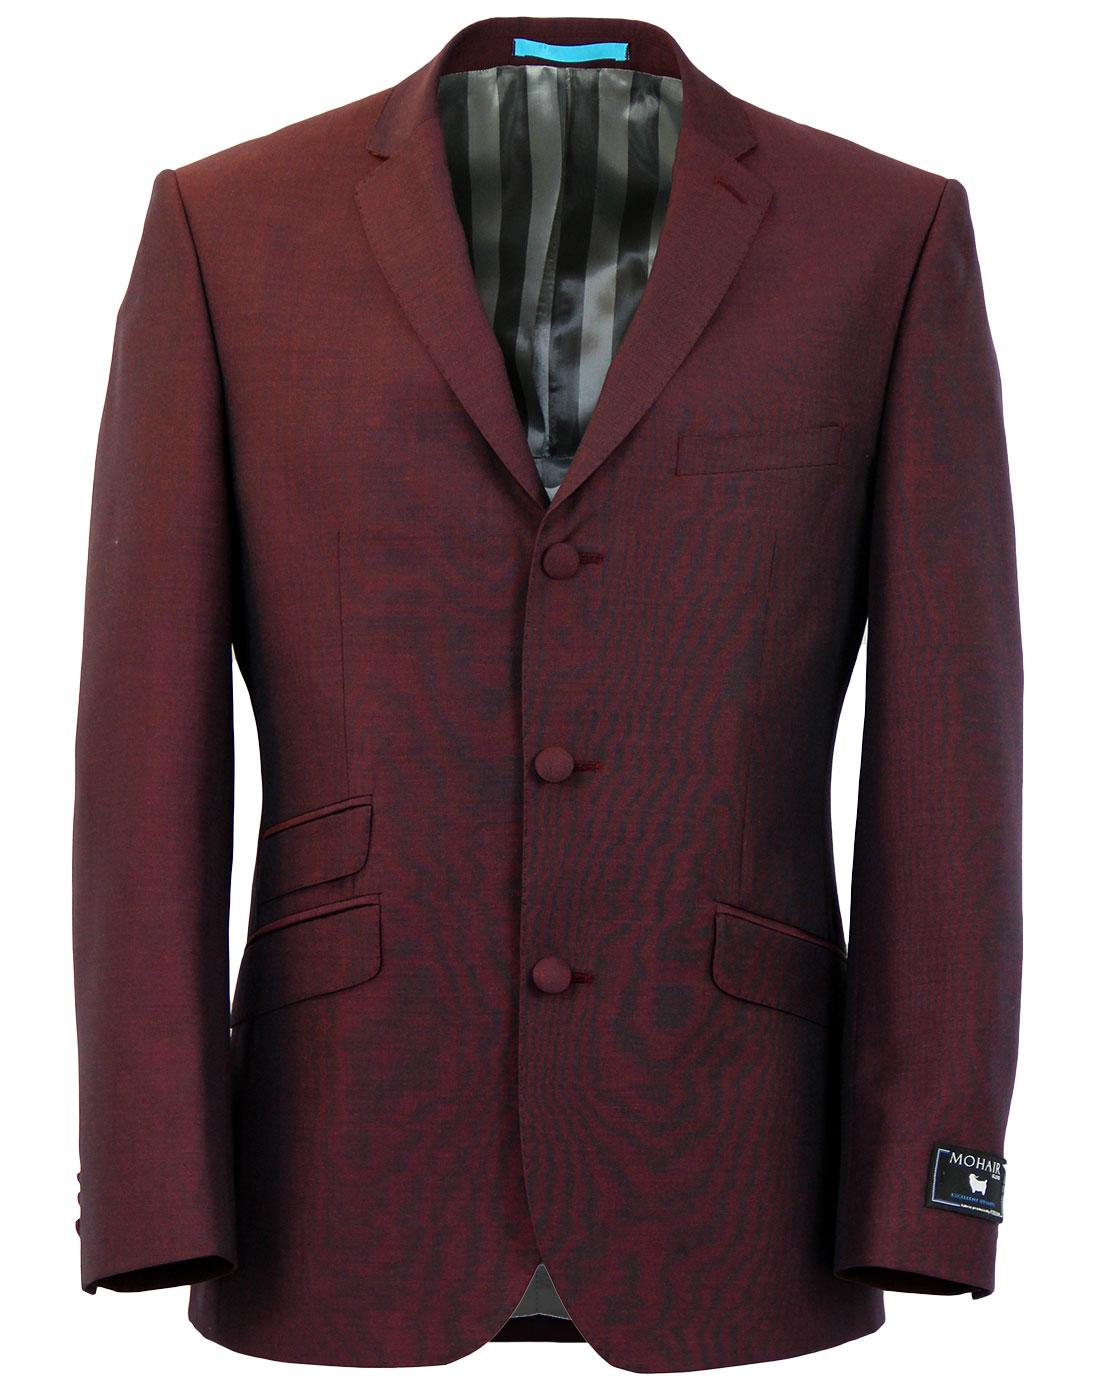 Retro 60s Mod Mohair Blend 3 Button Suit Jacket in Berry Red